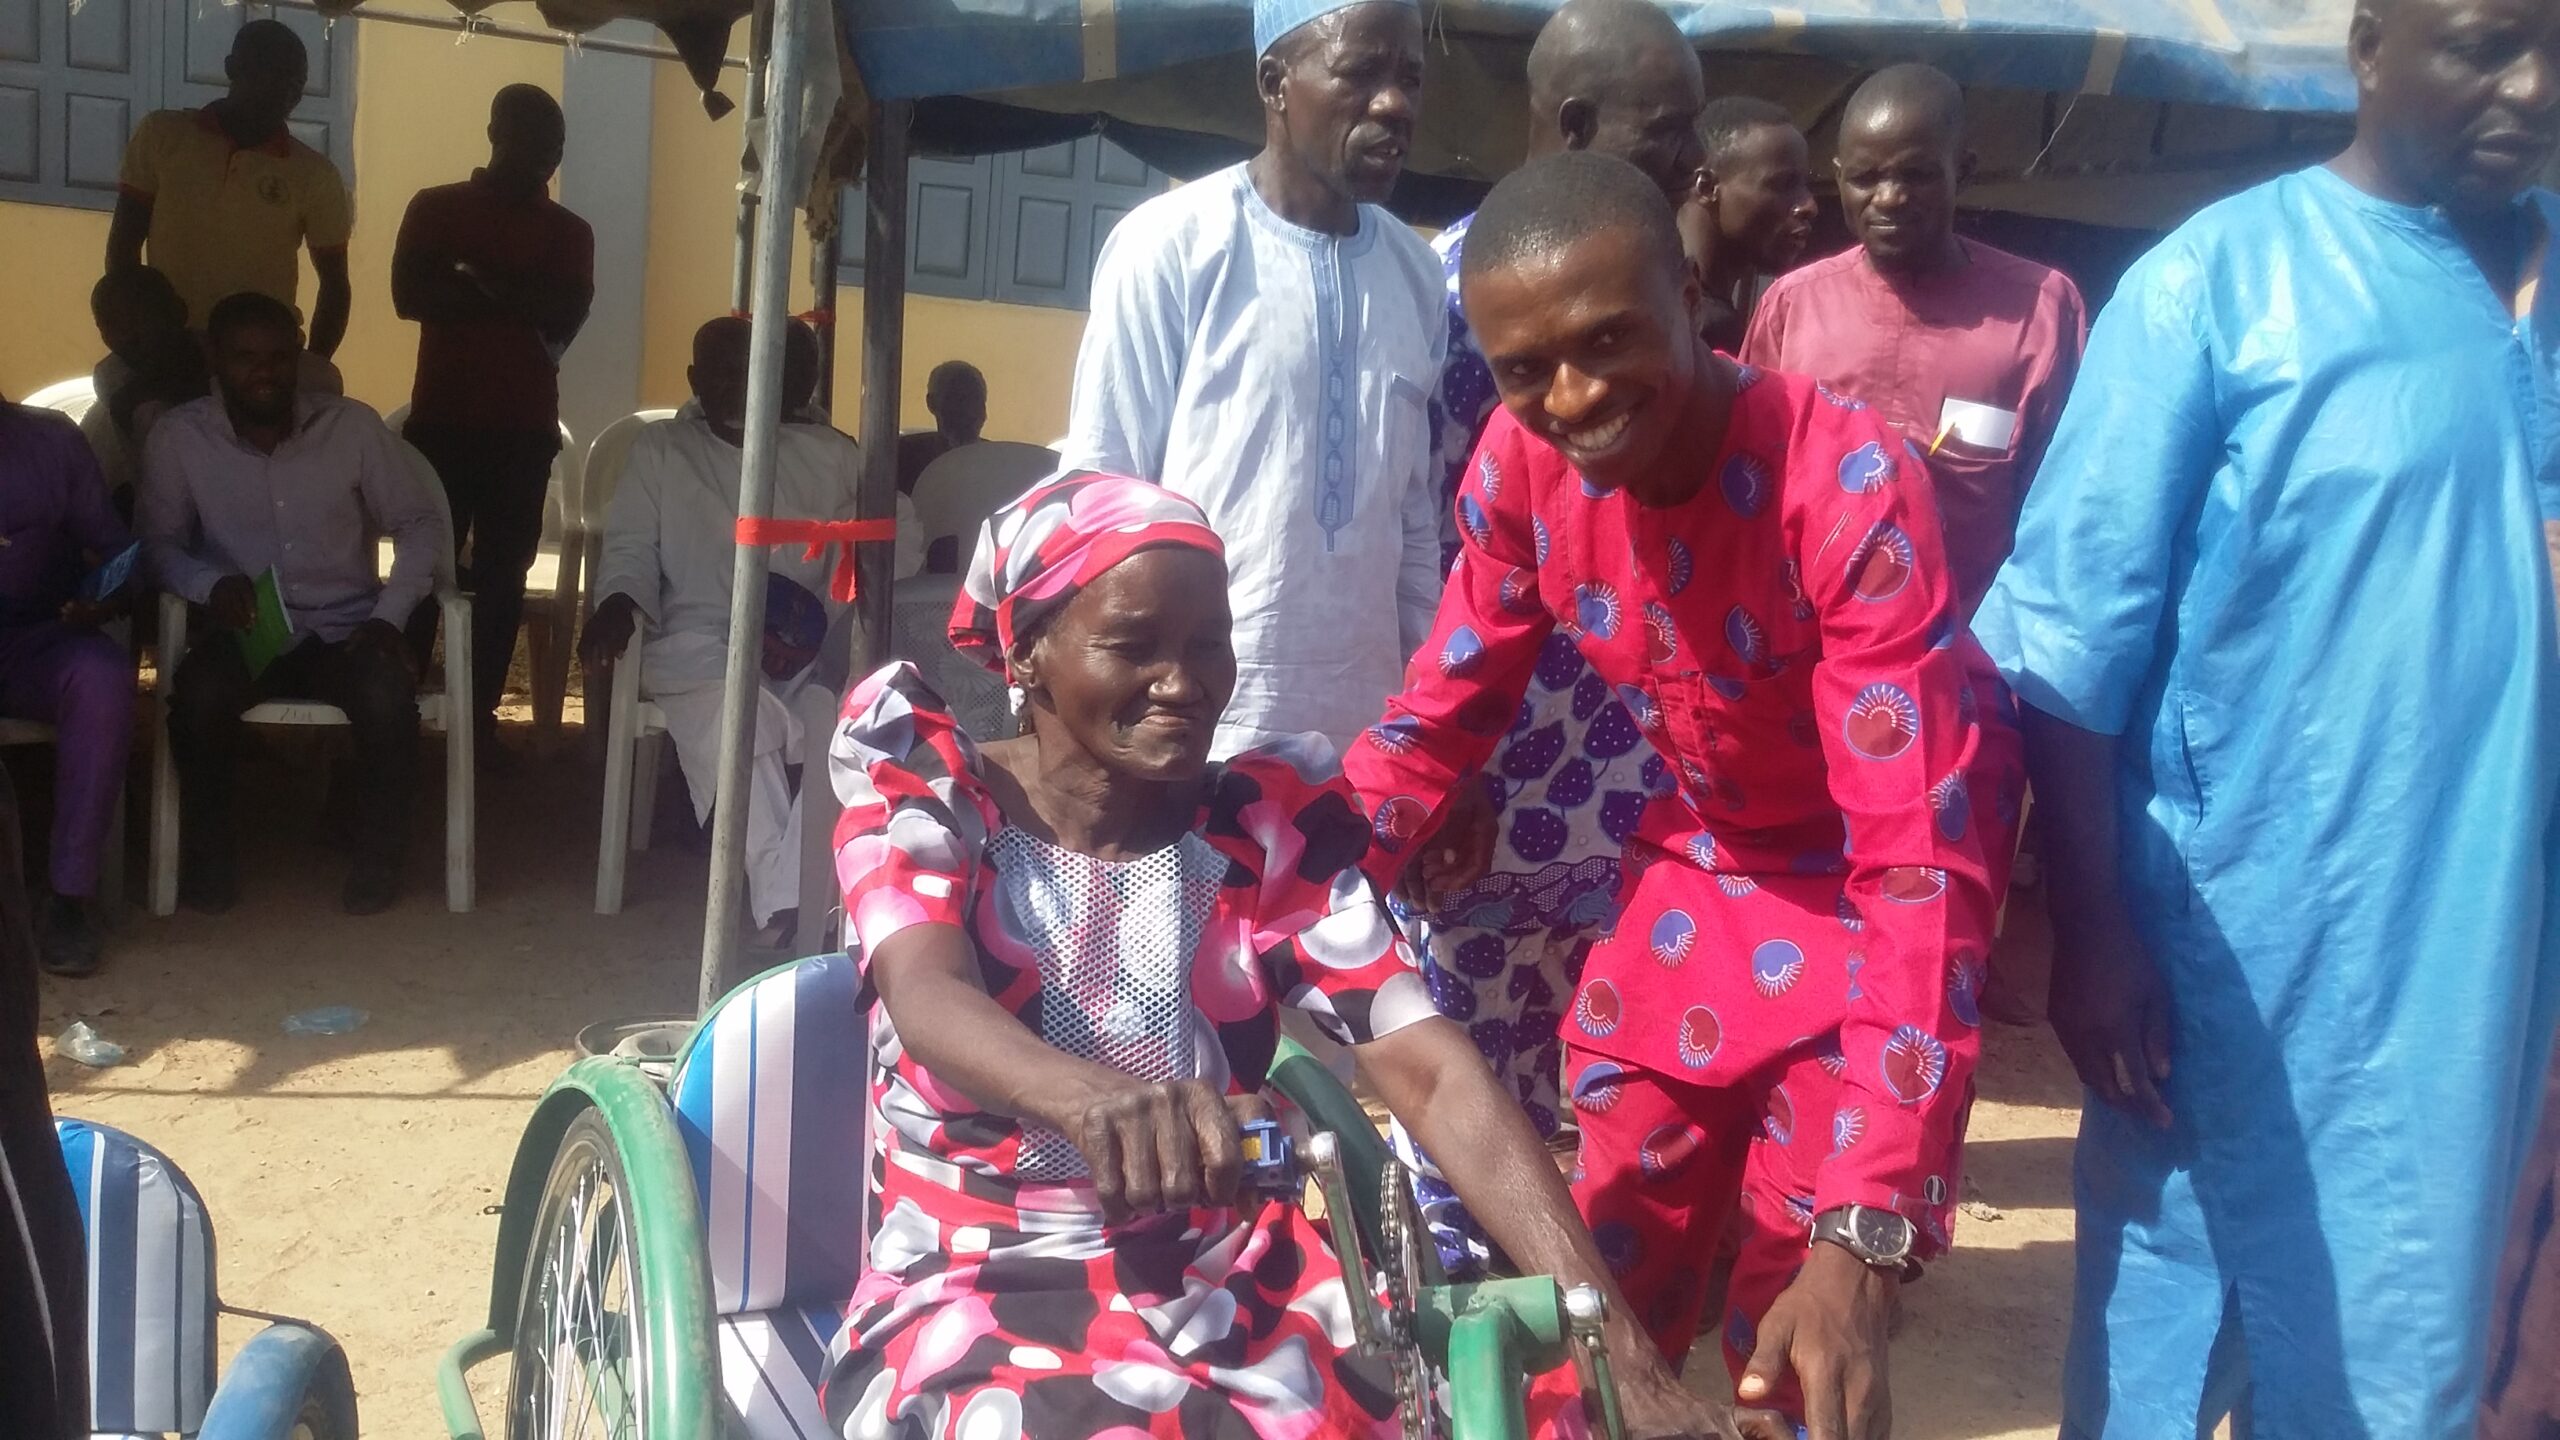 Beautiful Gate Handicapped People Center Jos donates10 White Canes and 20 Wheelchairs to Physically Challenged Person in Zul Village of Toro Bauchi State